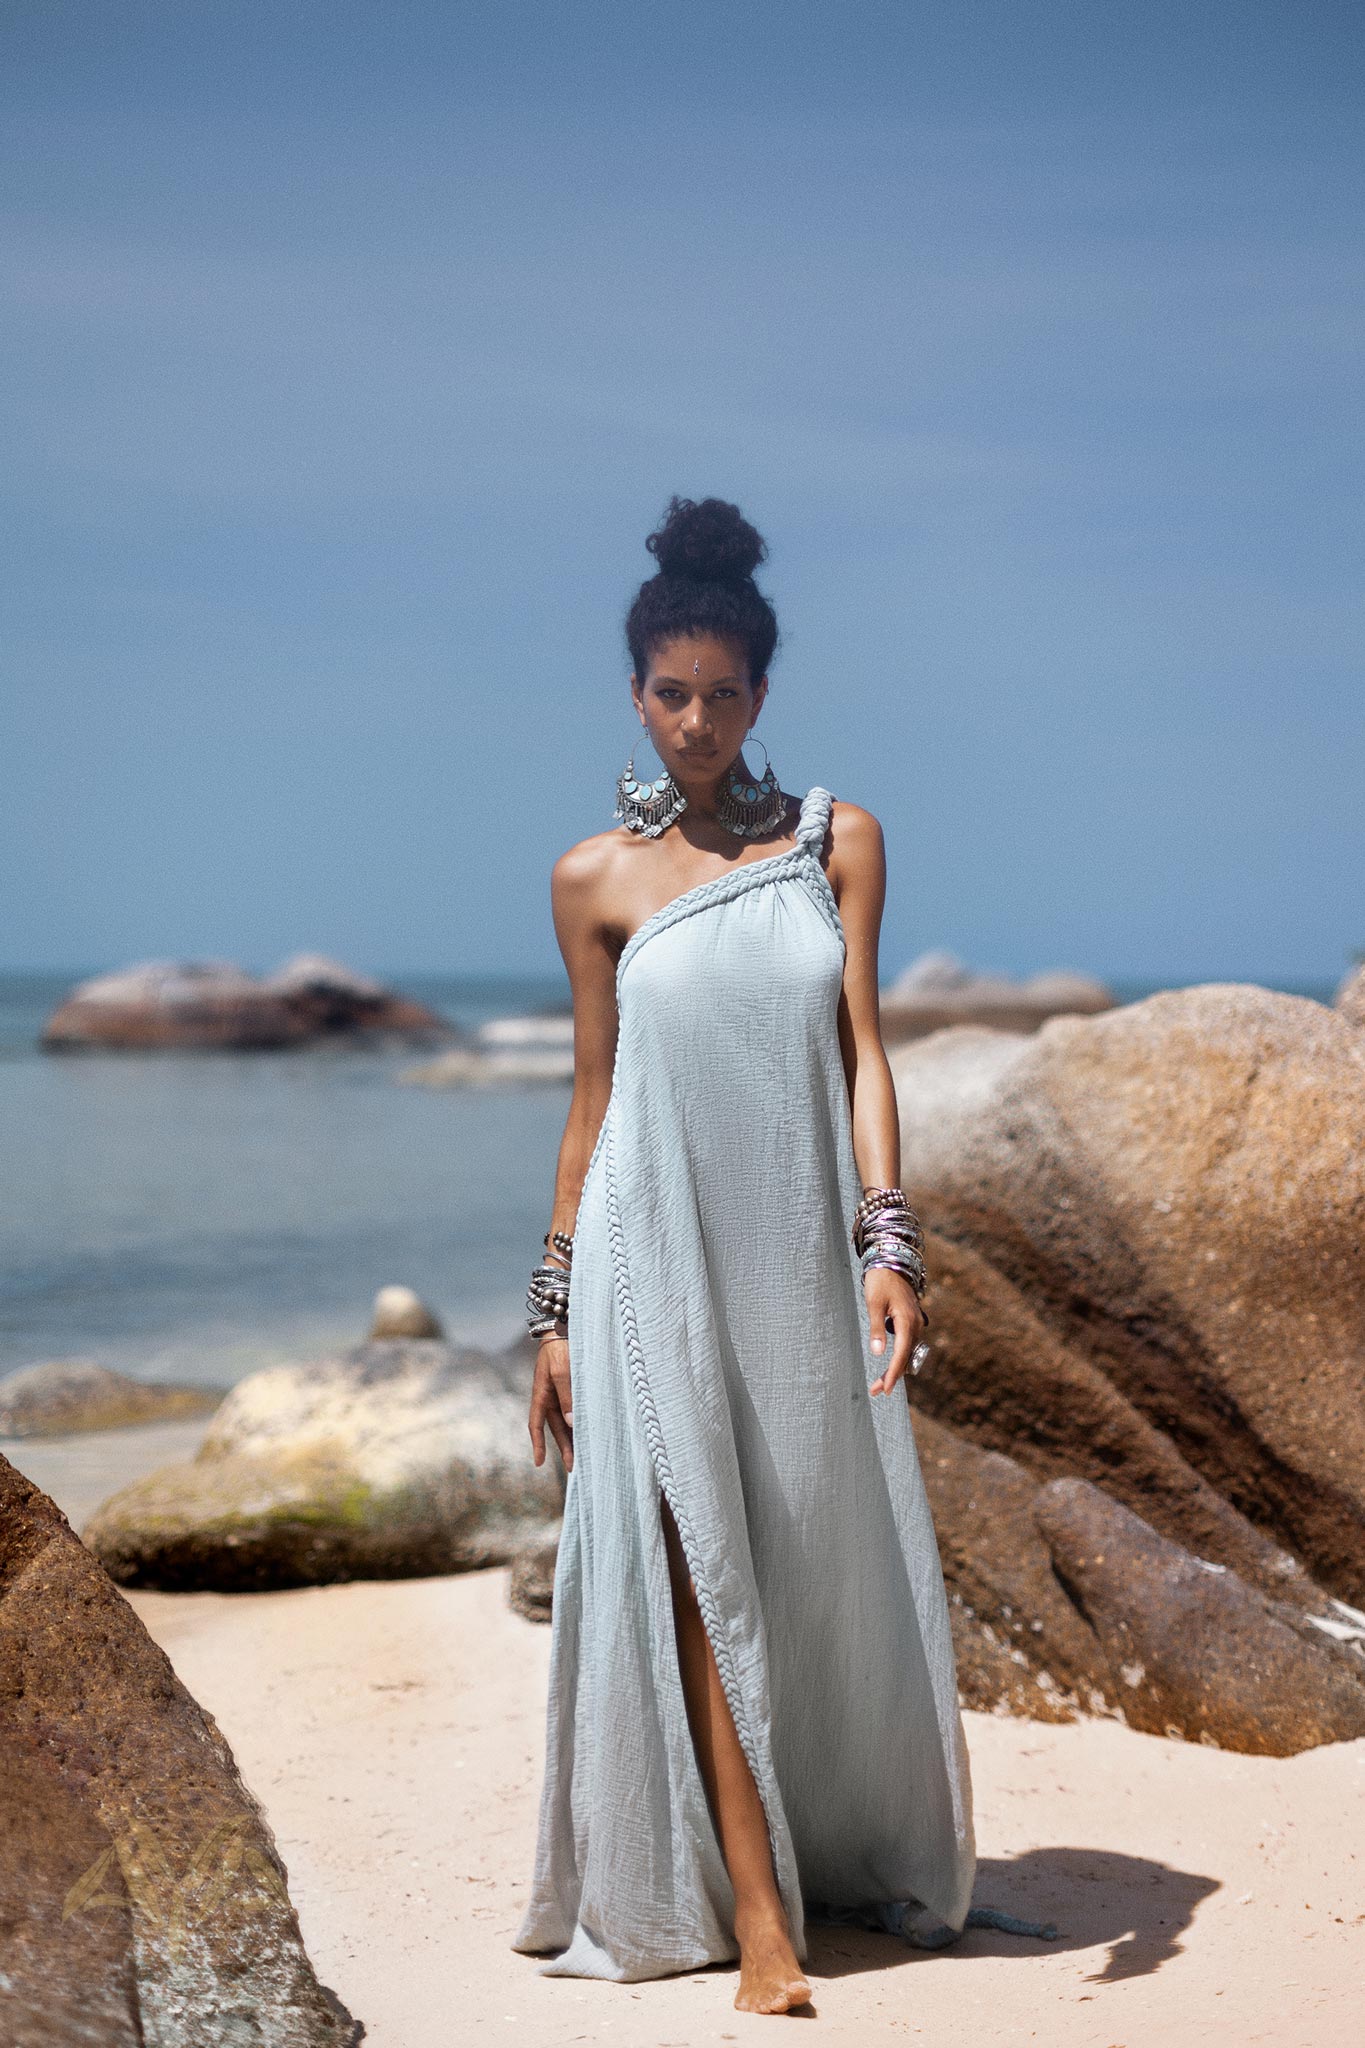 Stand Out from the Crowd with Our Organic Boho Cold Open Shoulder Maxi Dress by AYA Sacred Wear.